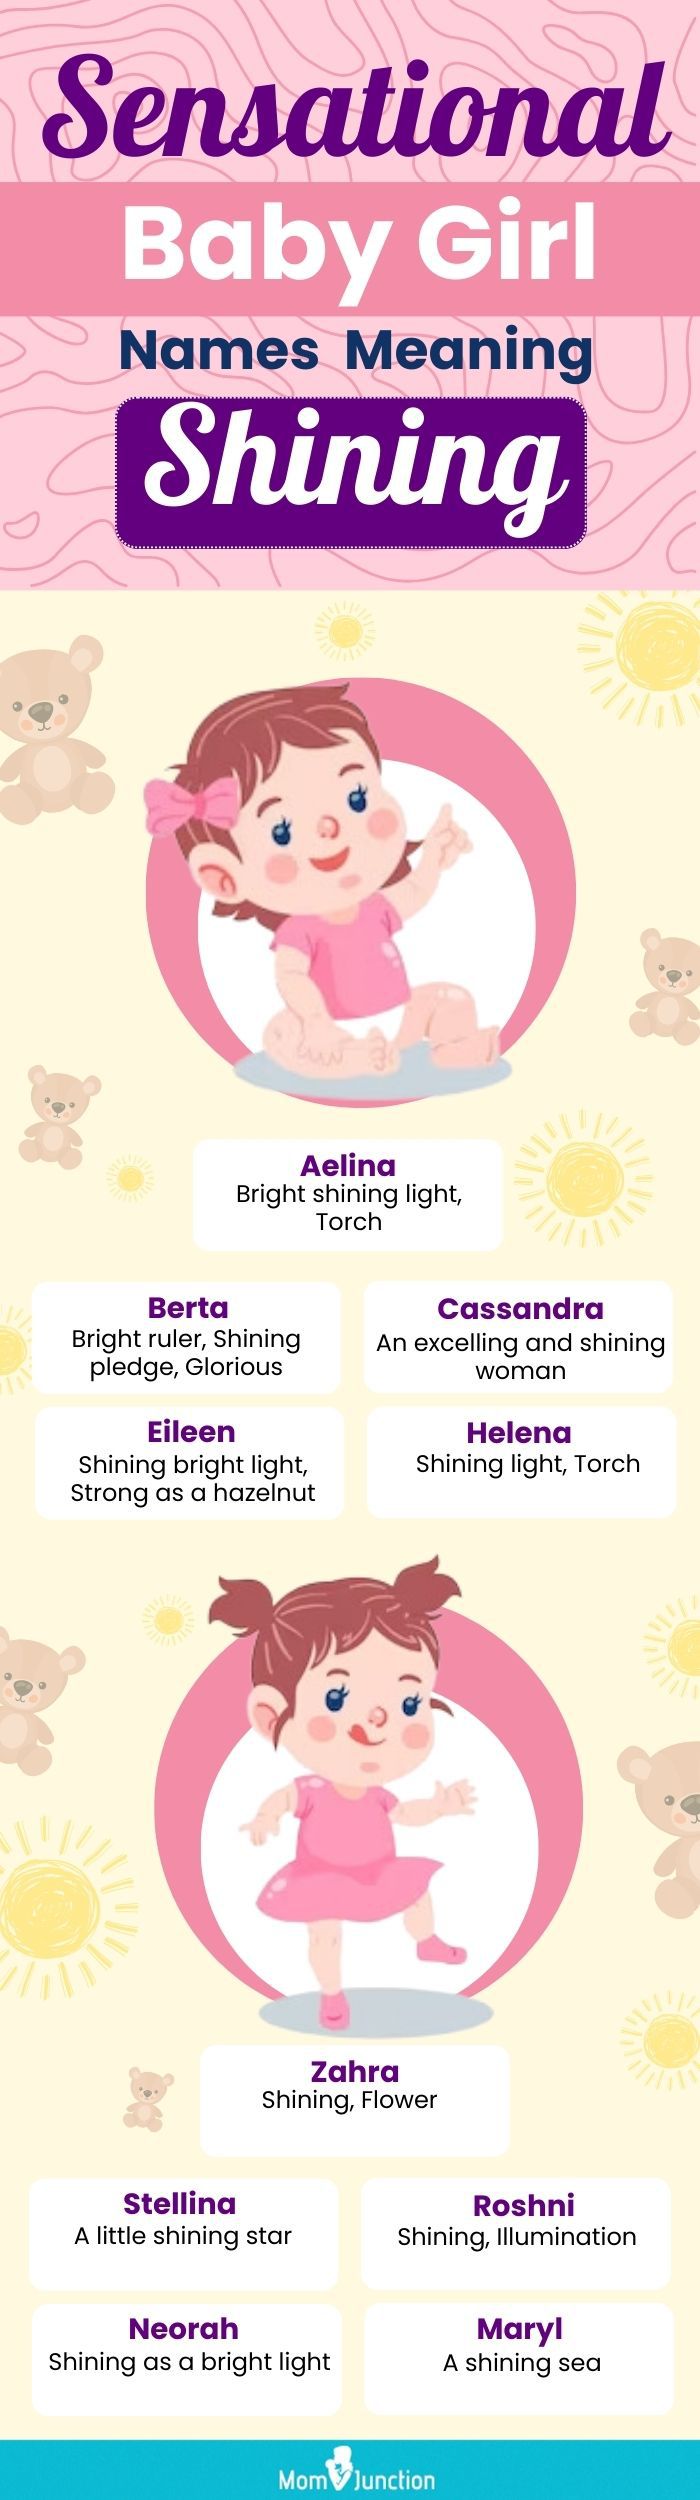 sensational baby girl names meaning shining (infographic)